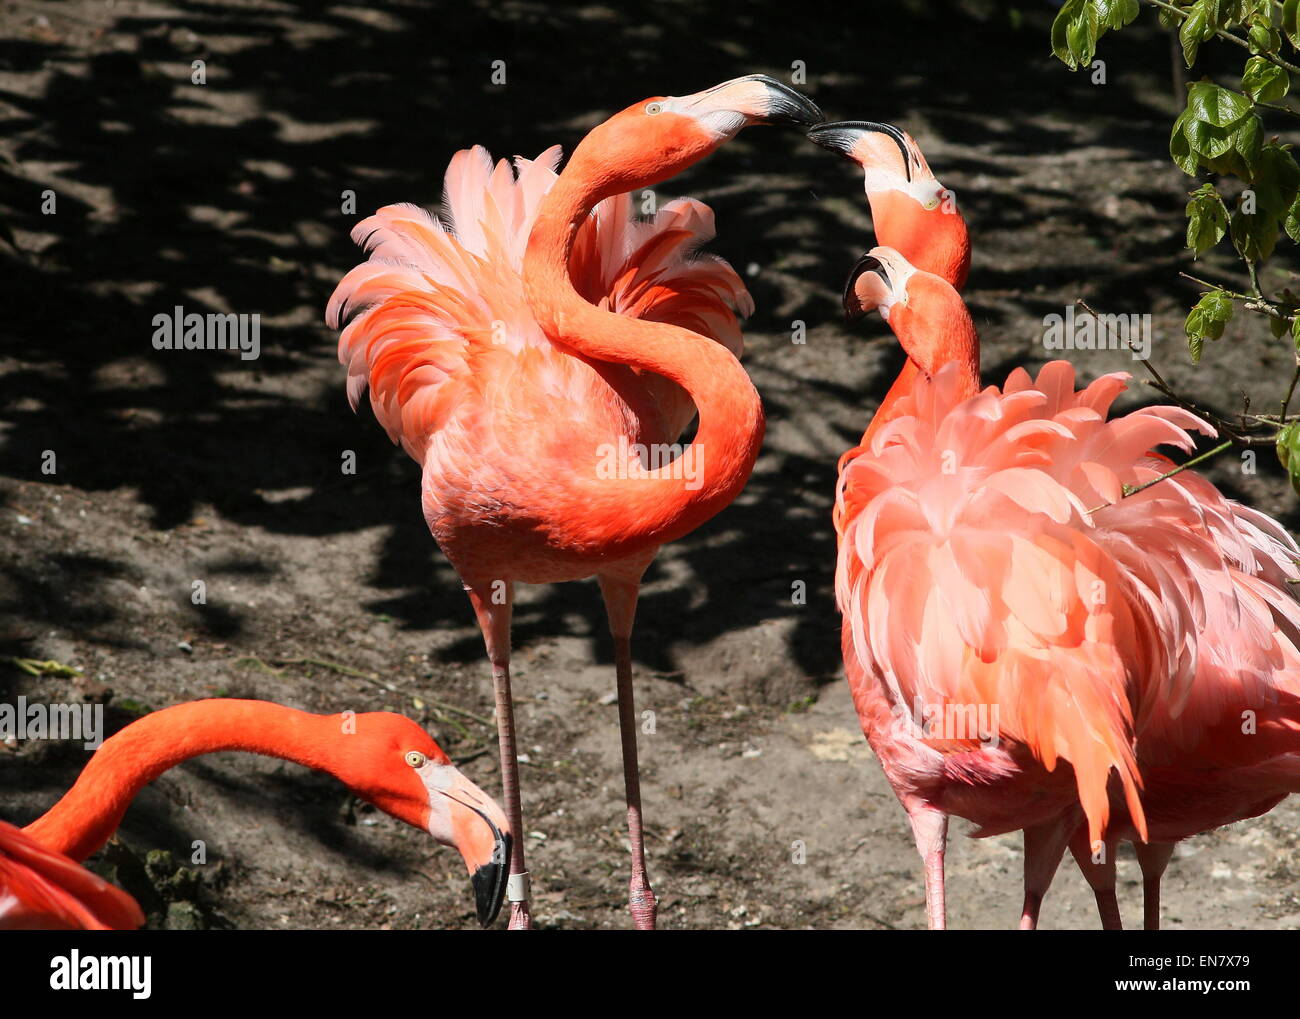 Three spunky American or Caribbean flamingos  (Phoenicopterus ruber) fighting, tempers flaring Stock Photo